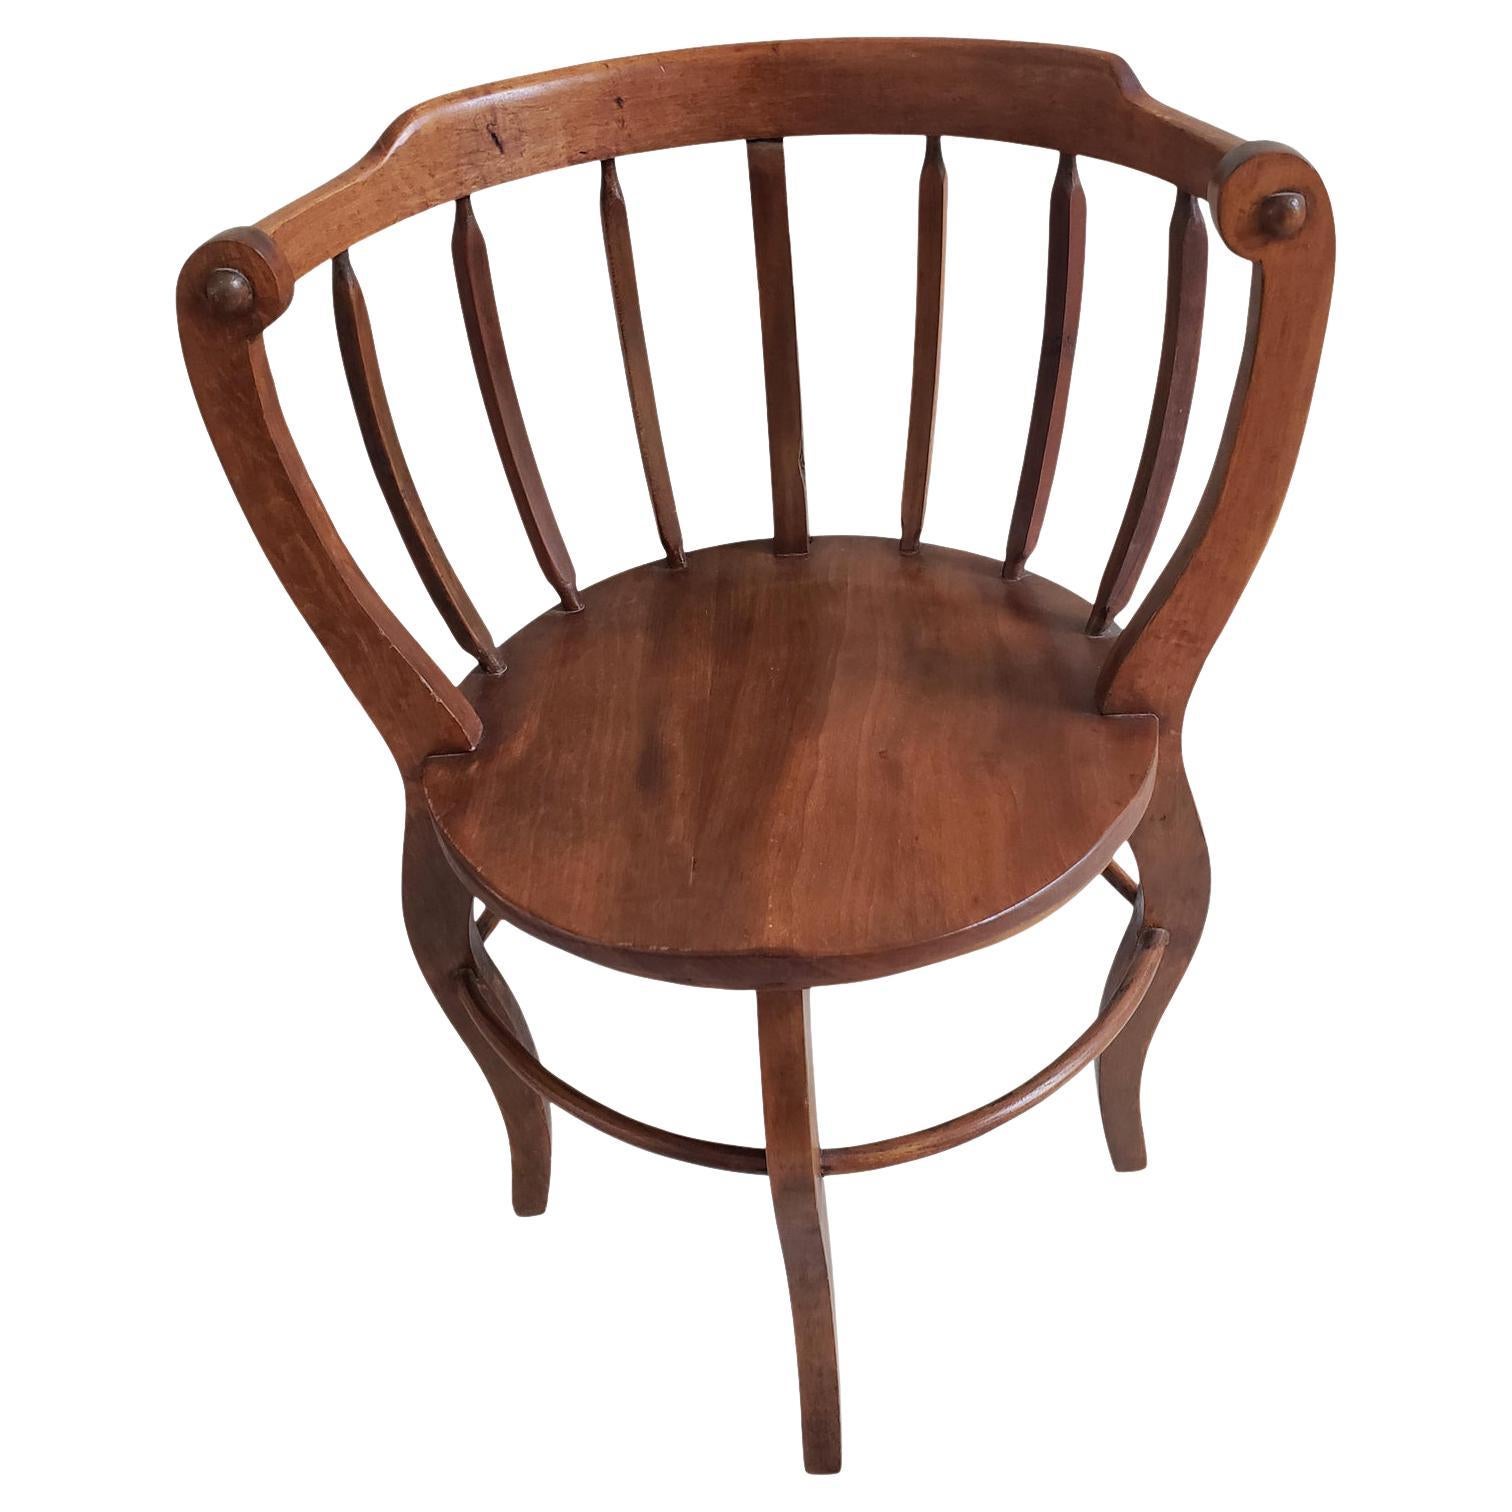 Antique Round Chair with Vine Connecting Legs For Sale